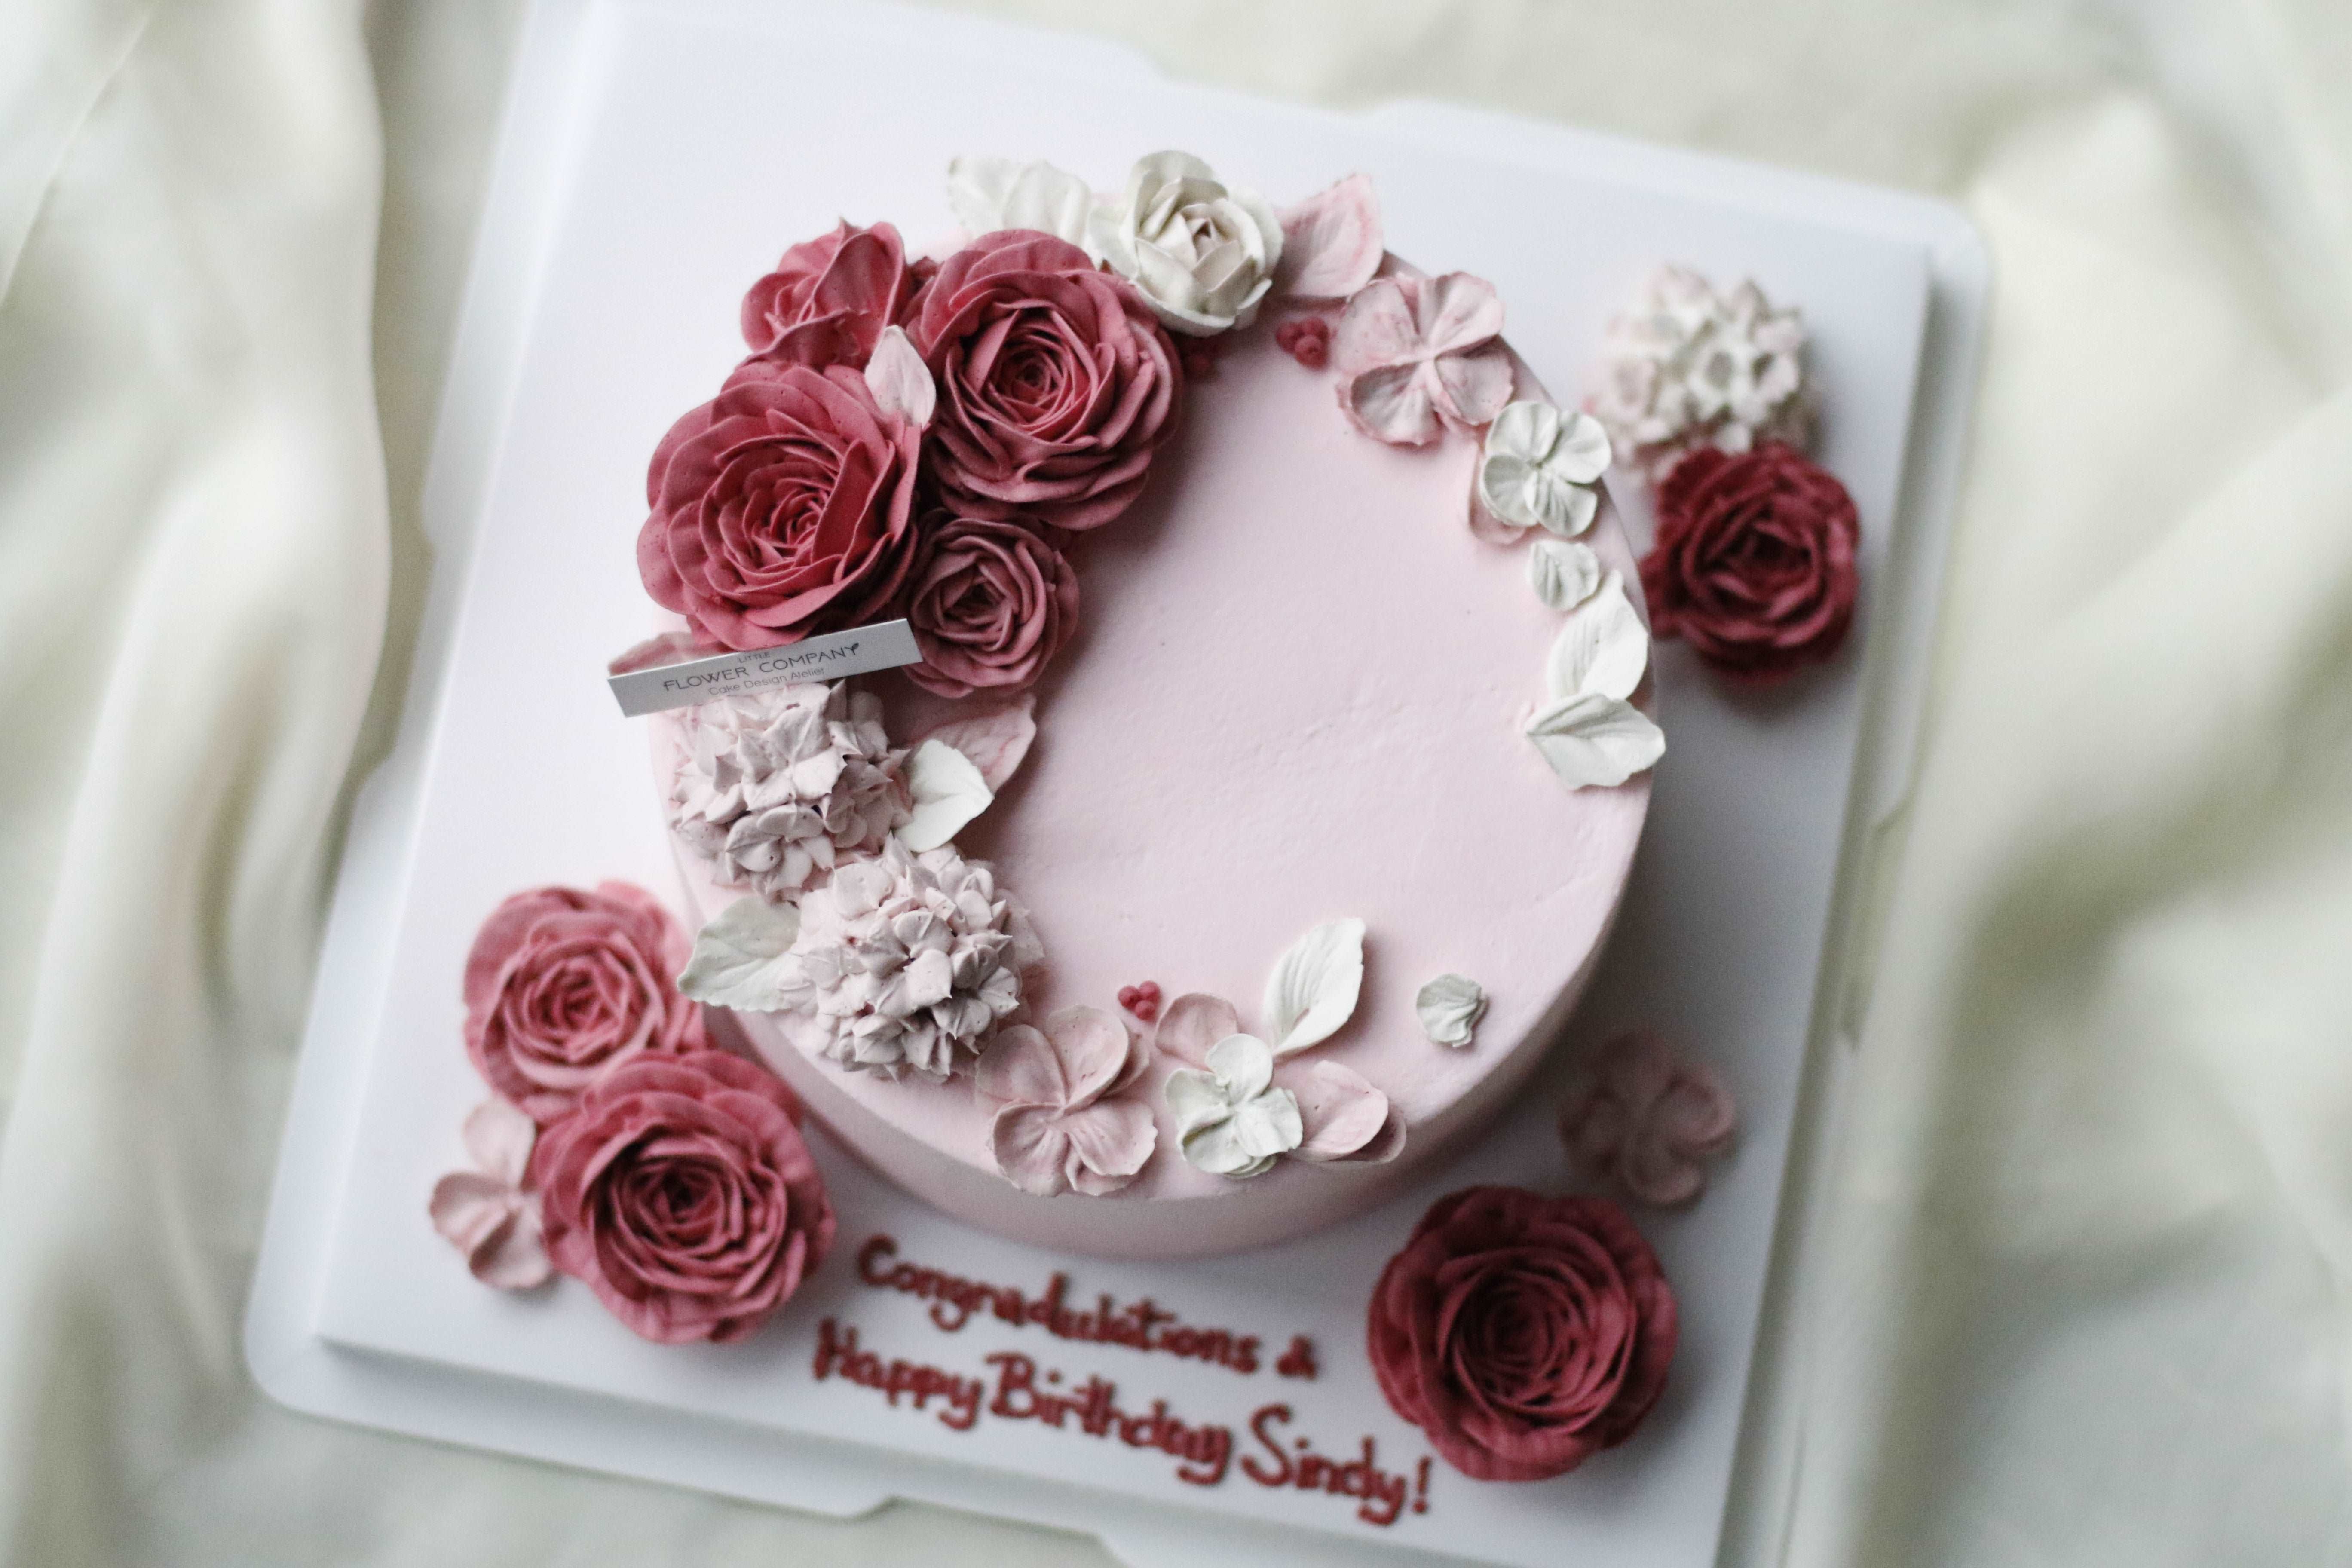 Buttercream Floral Cake By The Sweet Spot's Swee San Baker